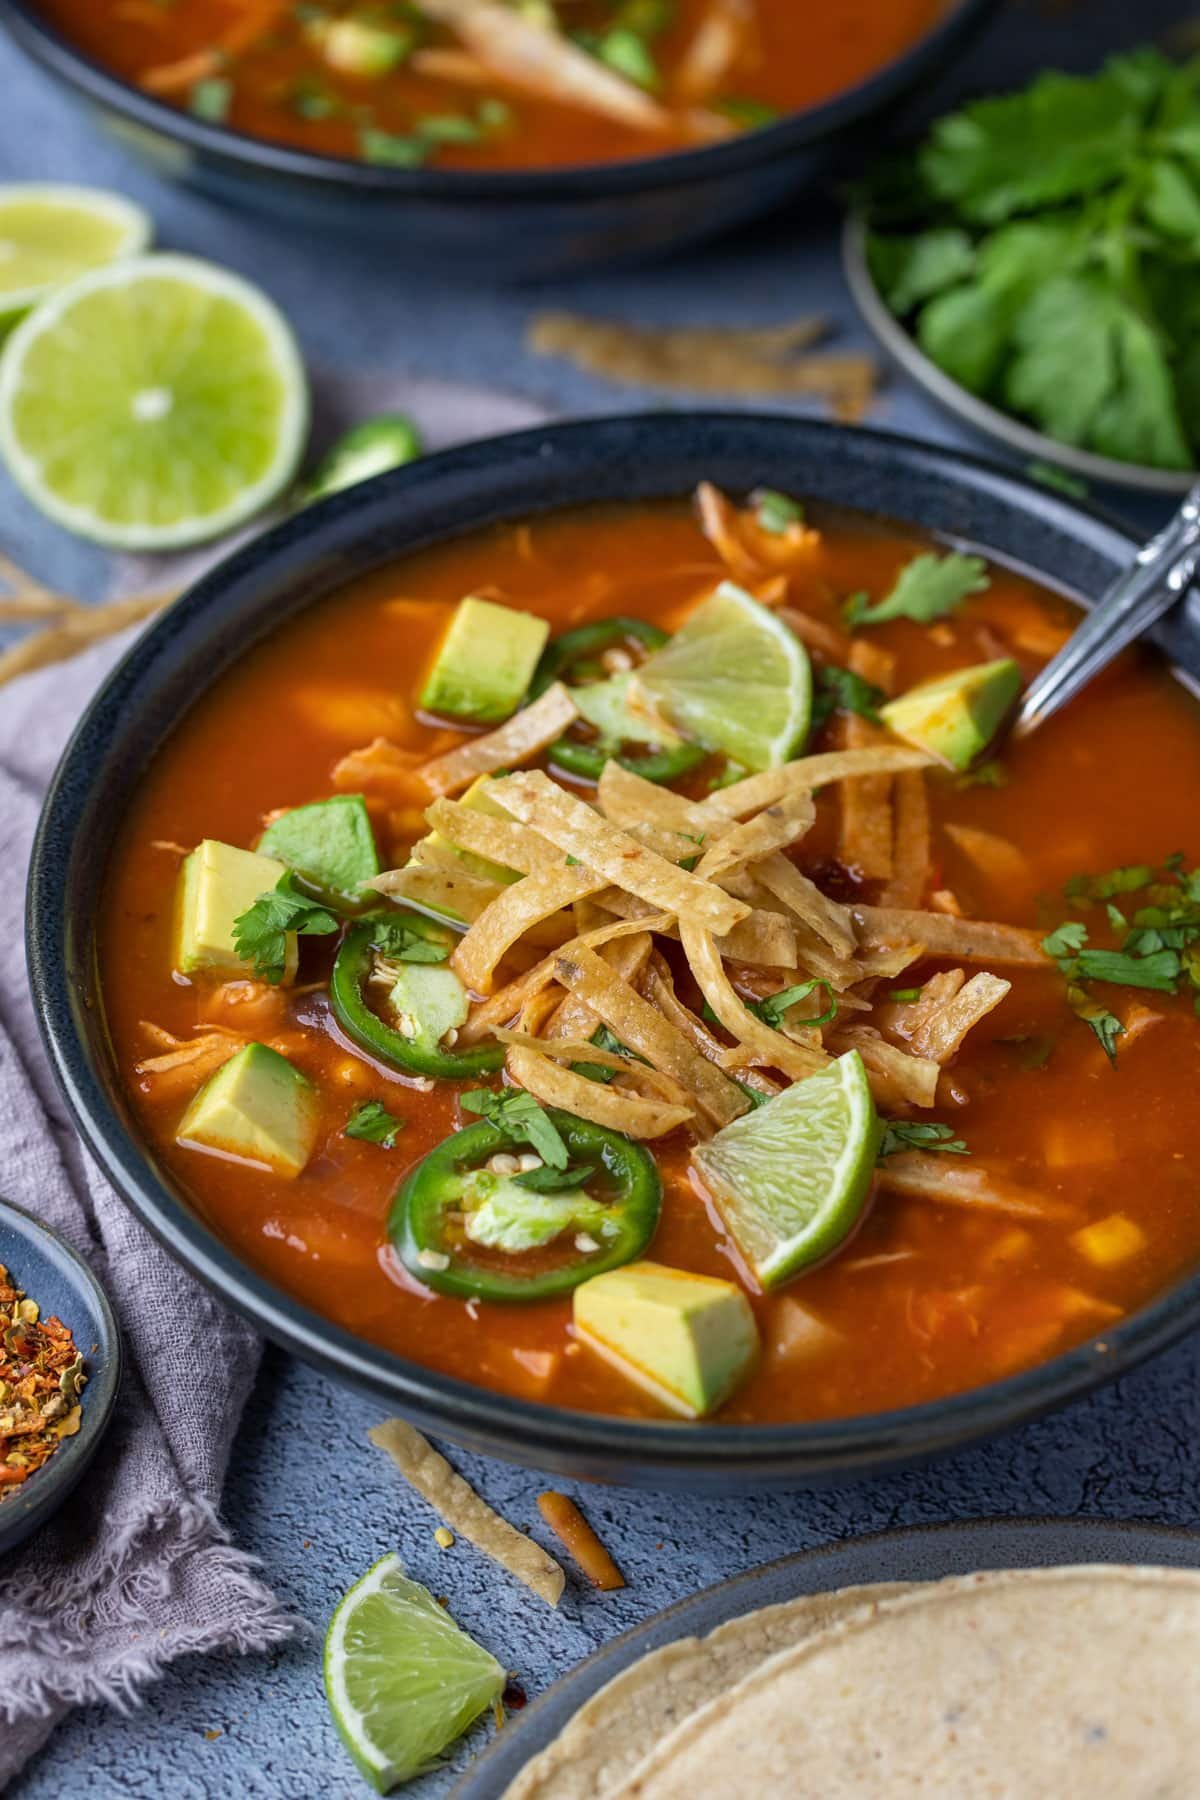 a bowl of soup topped with tortillas, avocado and slices of lime.